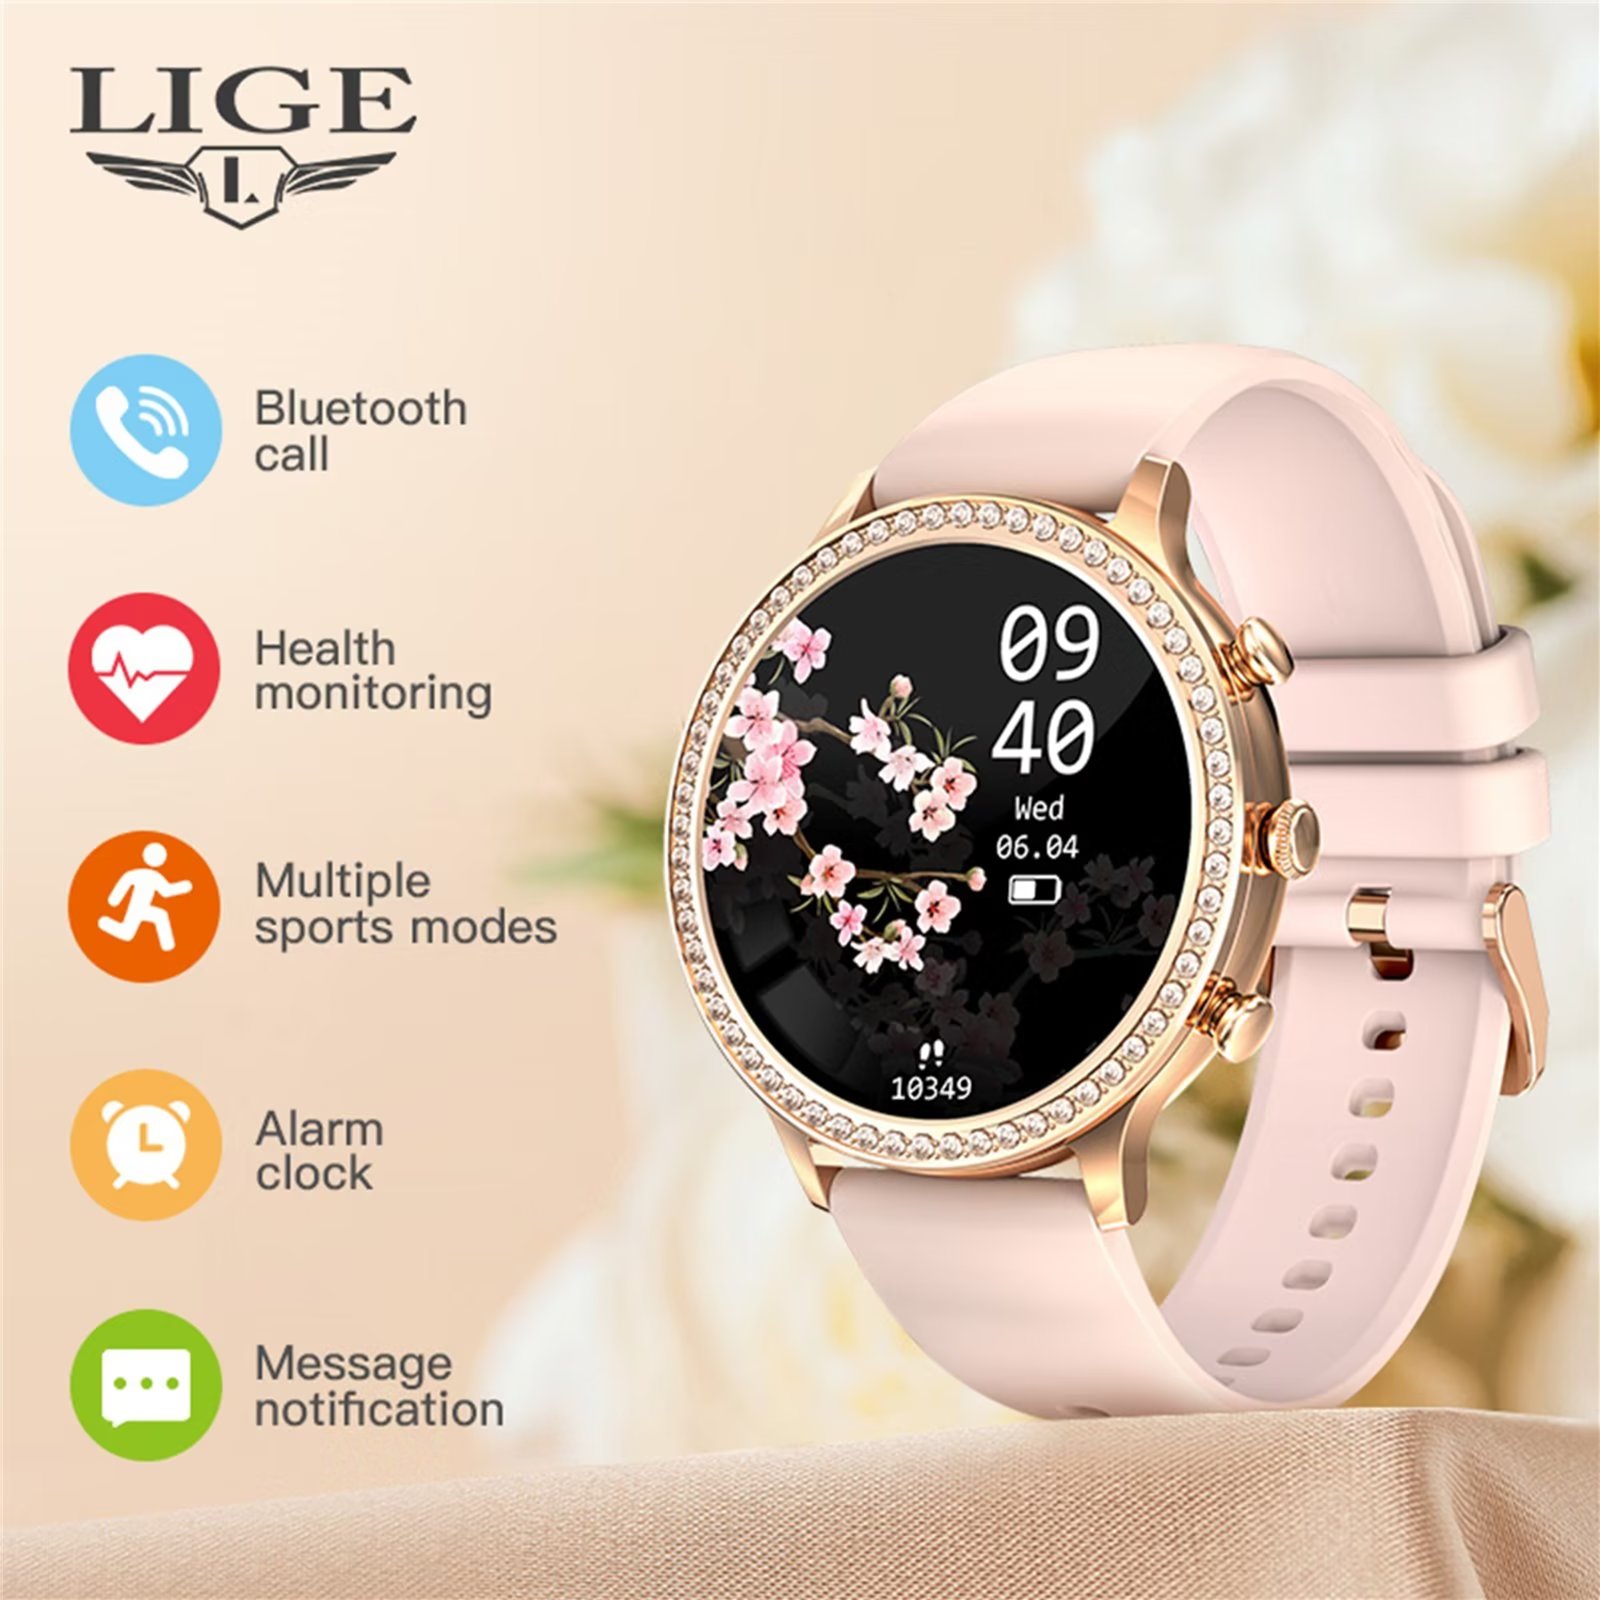 LIGE Women Smart Watches for Android iPhone Bluetooth Call Custom Dials Smartwatch Golden - image 3 of 11